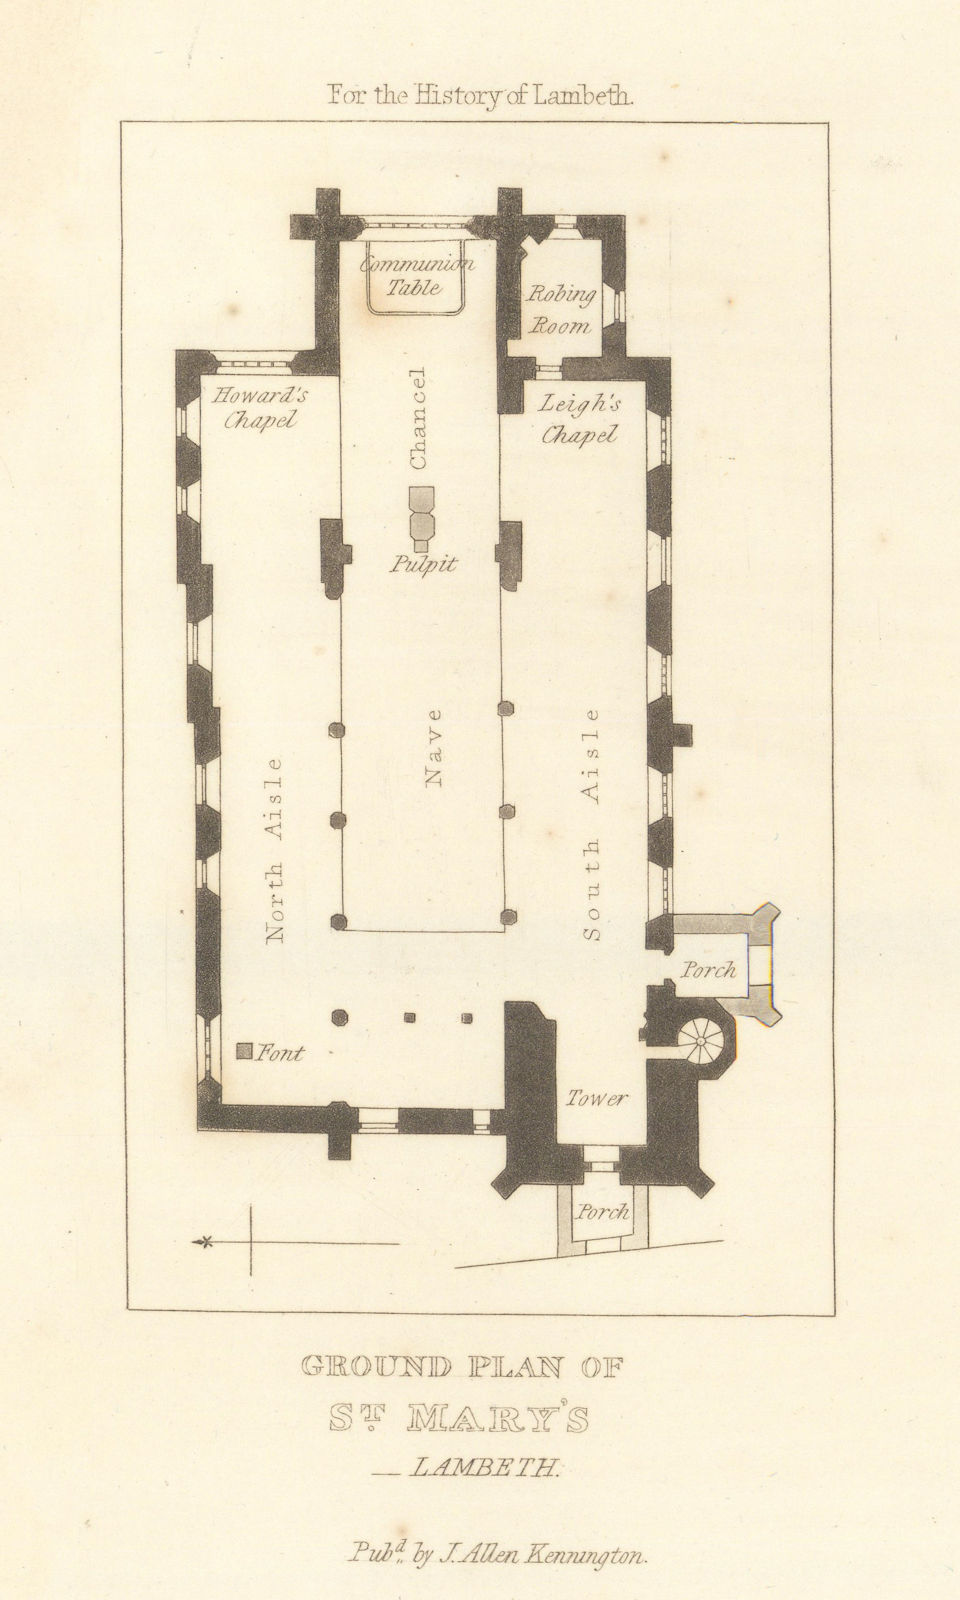 Associate Product Ground plan of St. Mary-at-Lambeth church 1827 old antique map chart